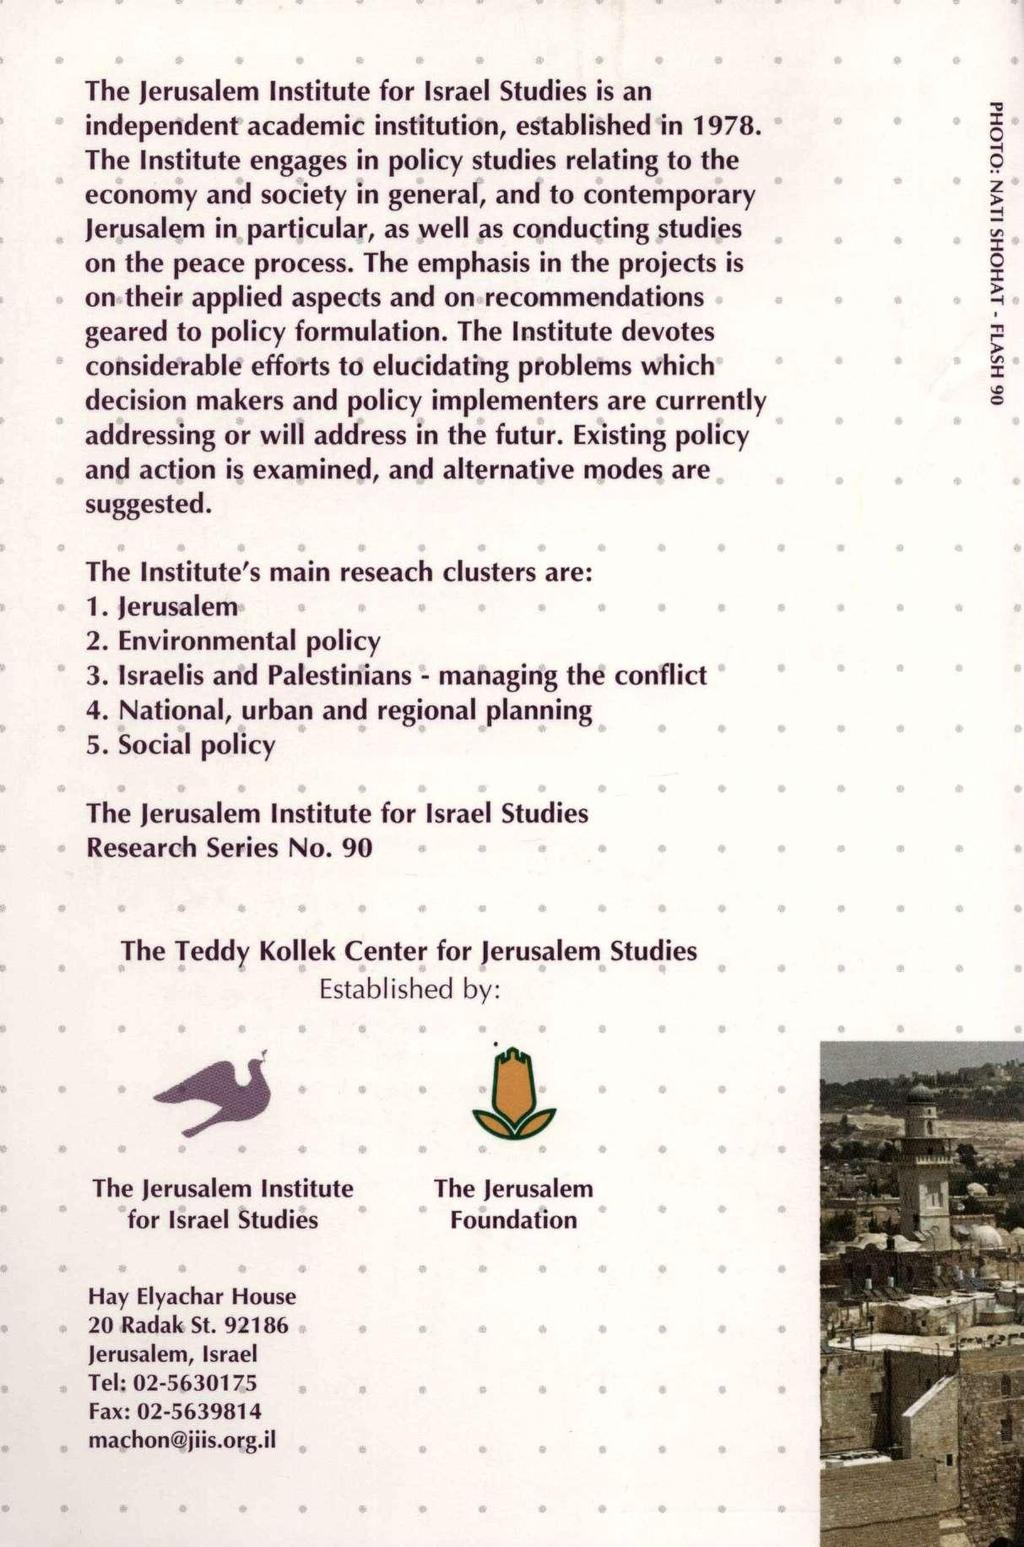 The Jerusalem Institute for Israel Studies is an independent academic institution, established in 1978.